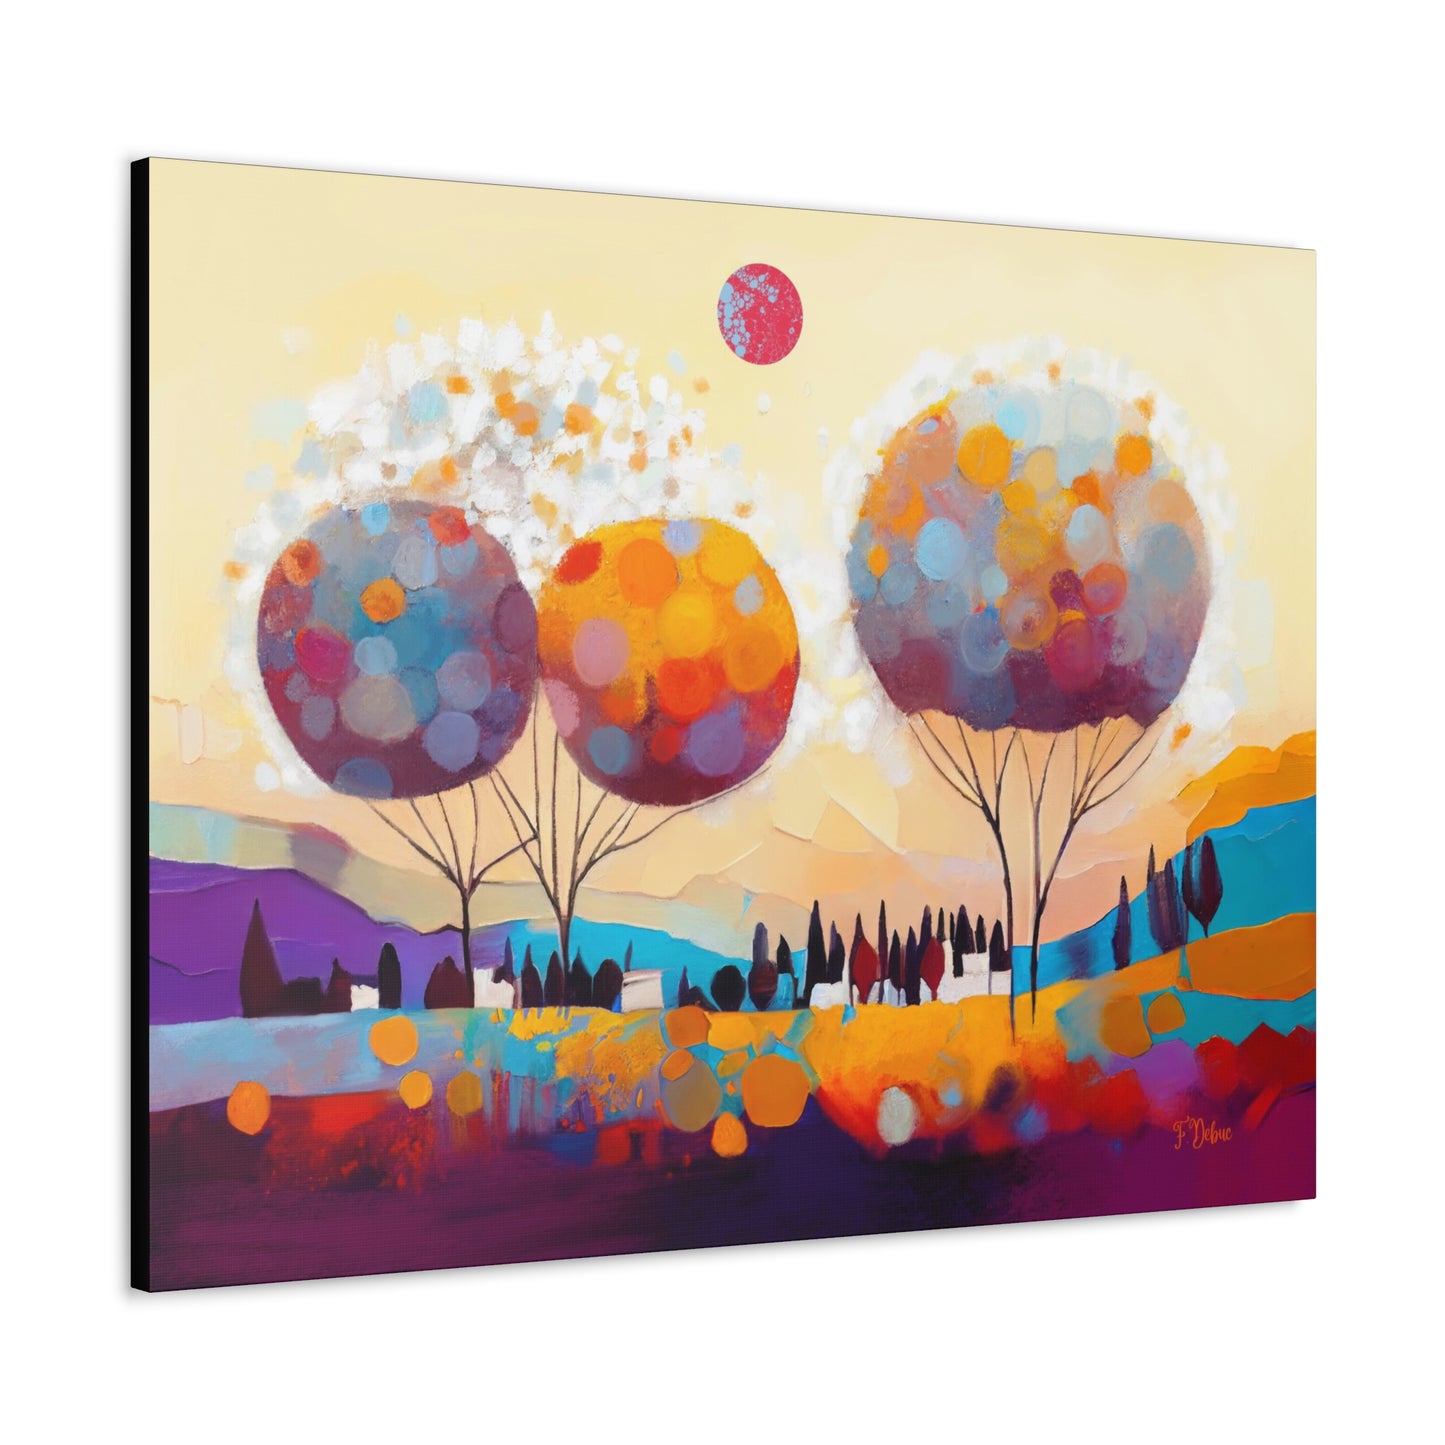 Ethereal Landscape - Canvas Wall Art